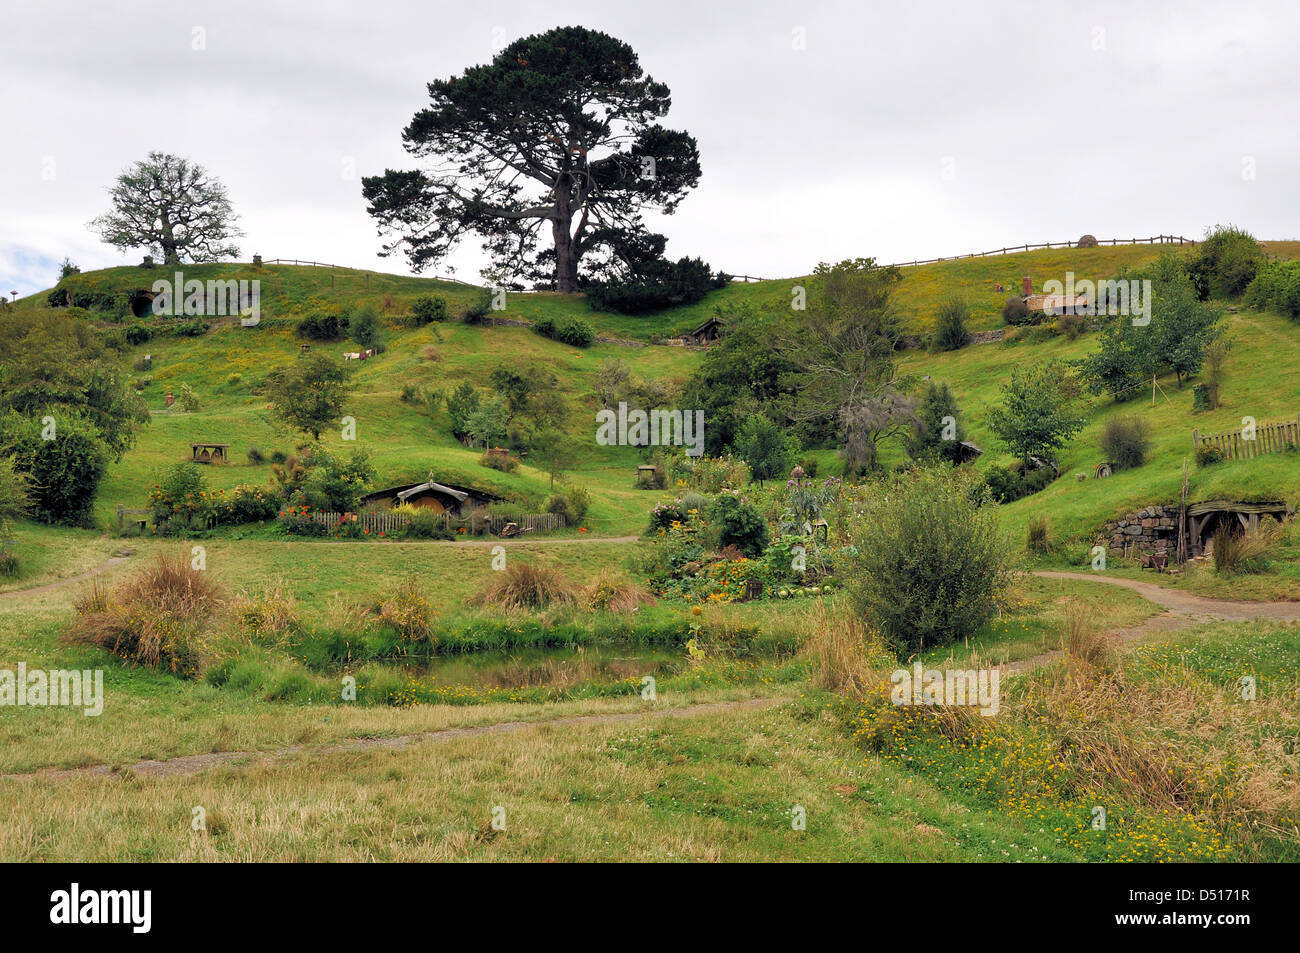 Hobbiton Movie Set - Location for the Lord of the Rings and The Hobbit films. Visitor attraction in Waikato region New Zealand. Space for copy Stock Photo